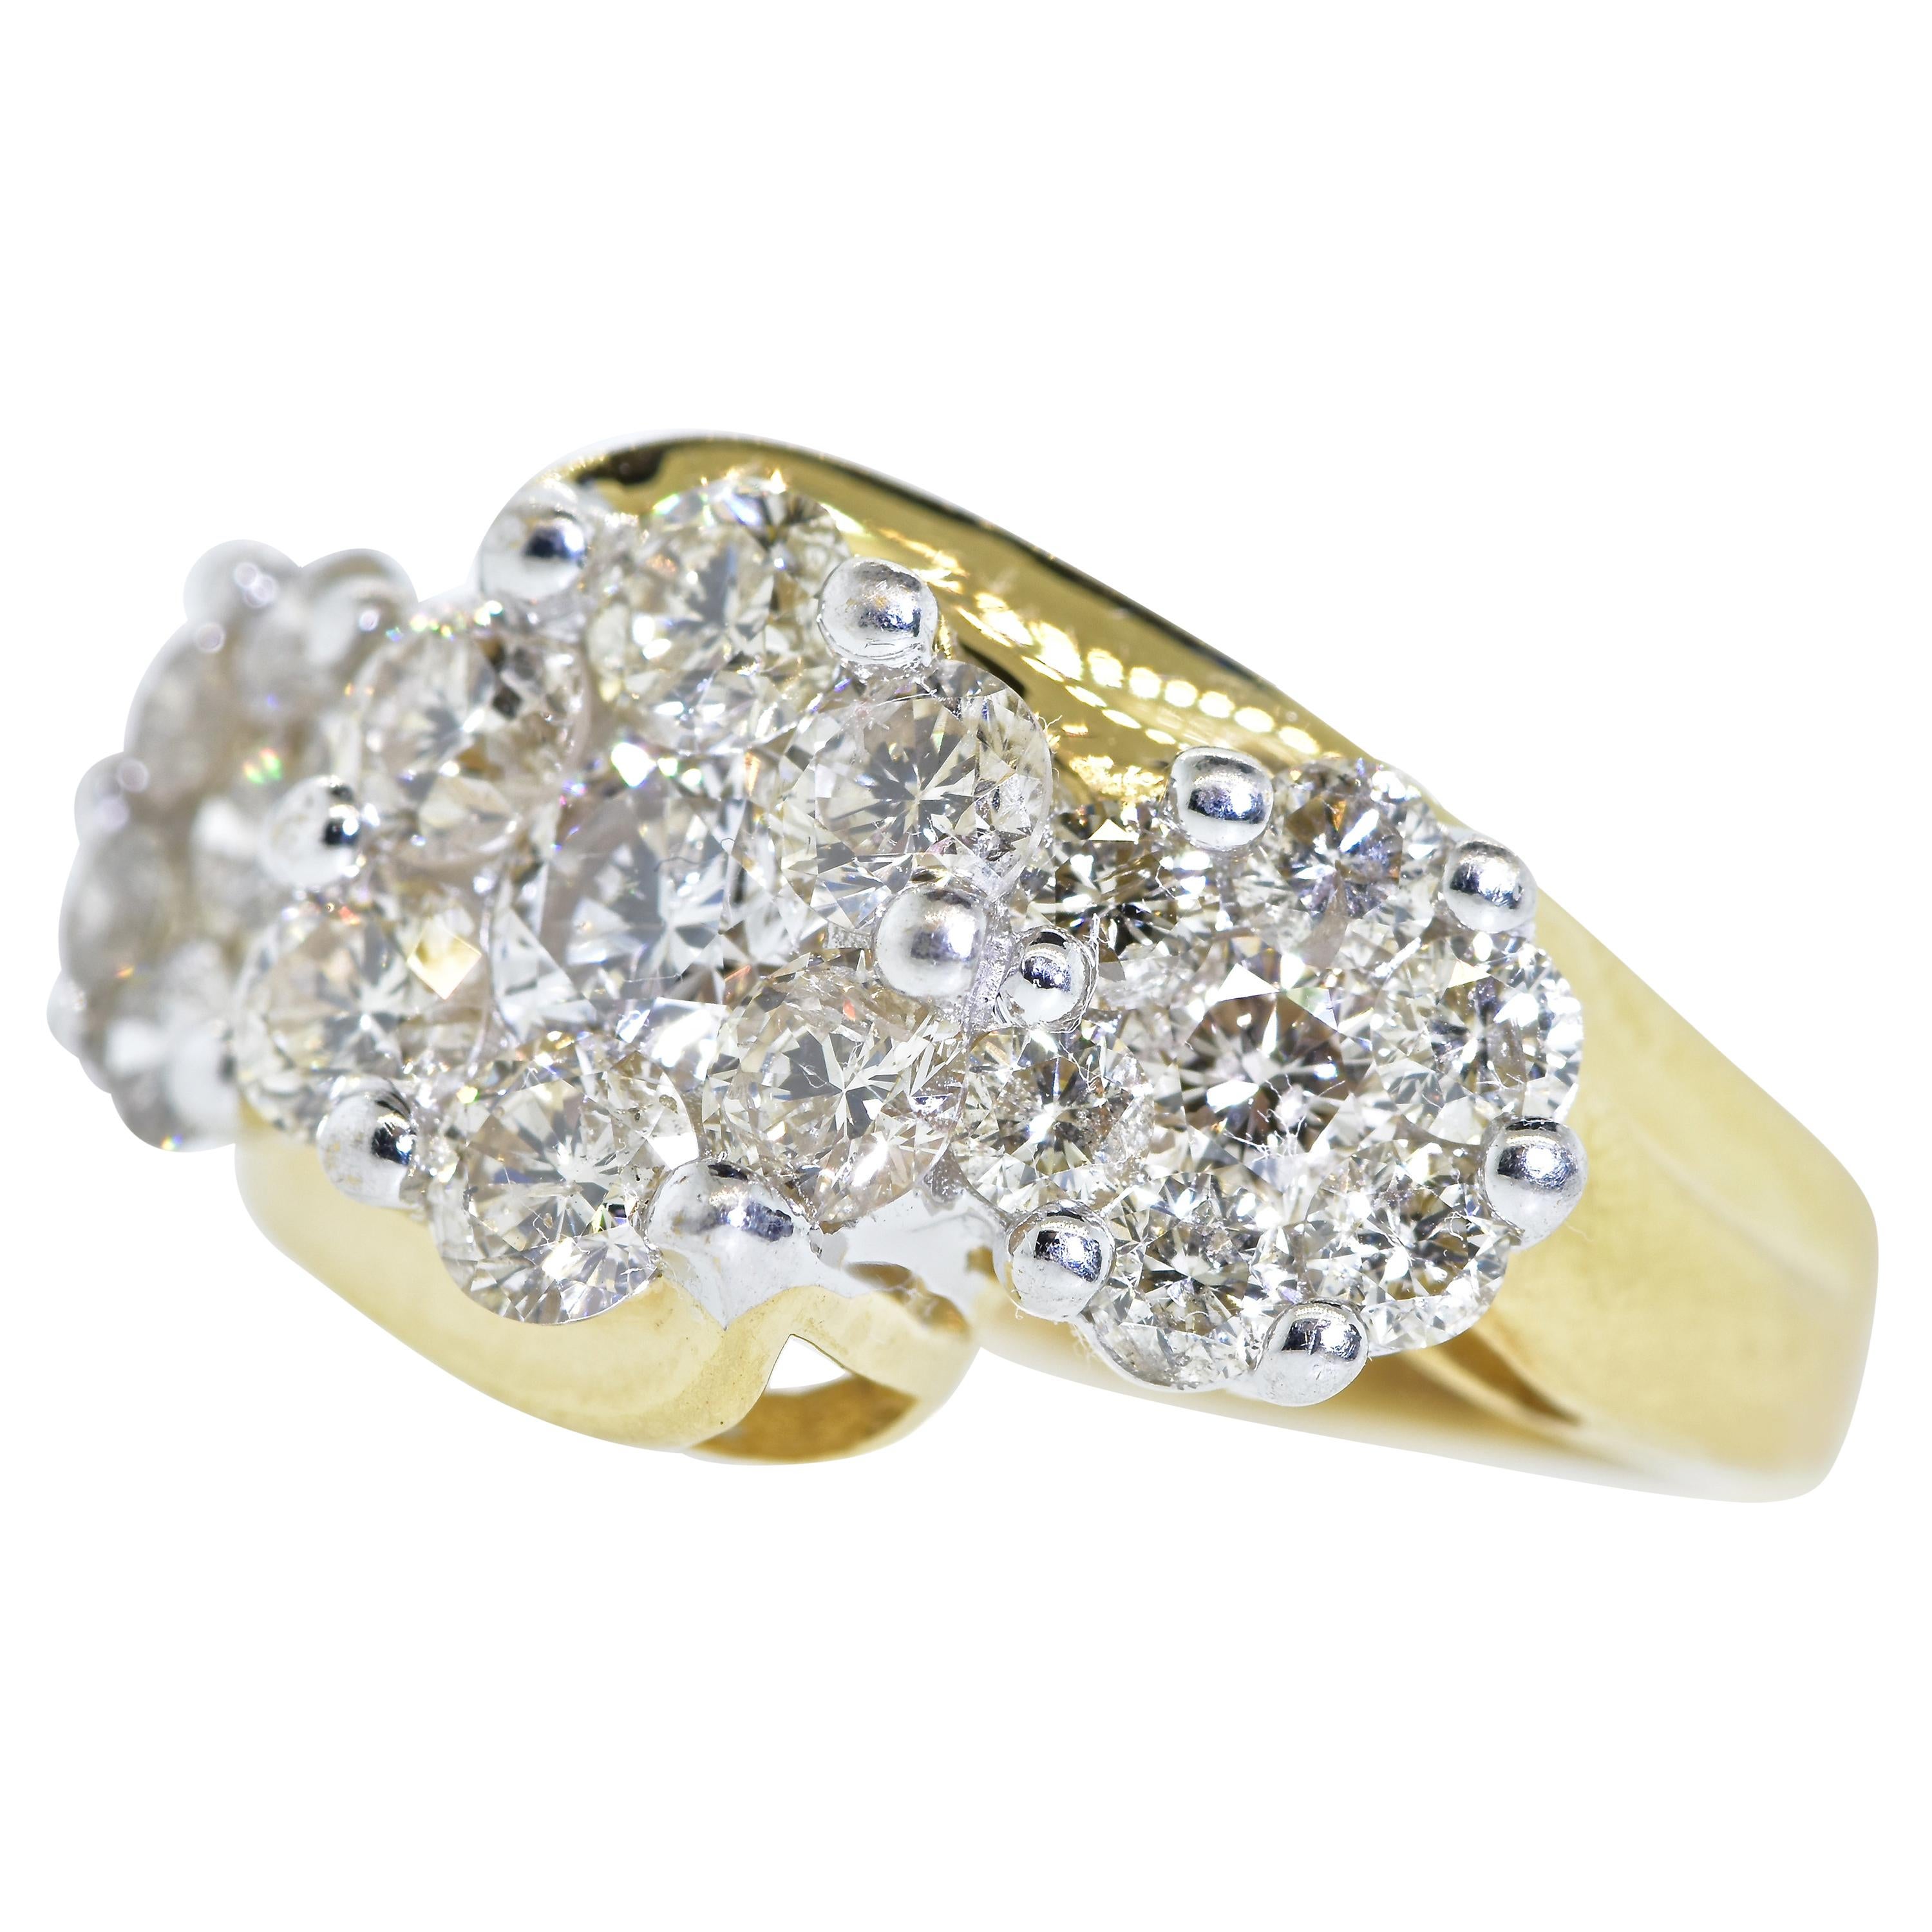 White diamonds are set in 3 floral motifs.  There are 2.5 cts. of round brilliant cut diamonds all are well cut and finely matched.  The 21 diamonds have fine symmetry, near colorless (H/I), and very slightly included (VS).  This contemporary ring